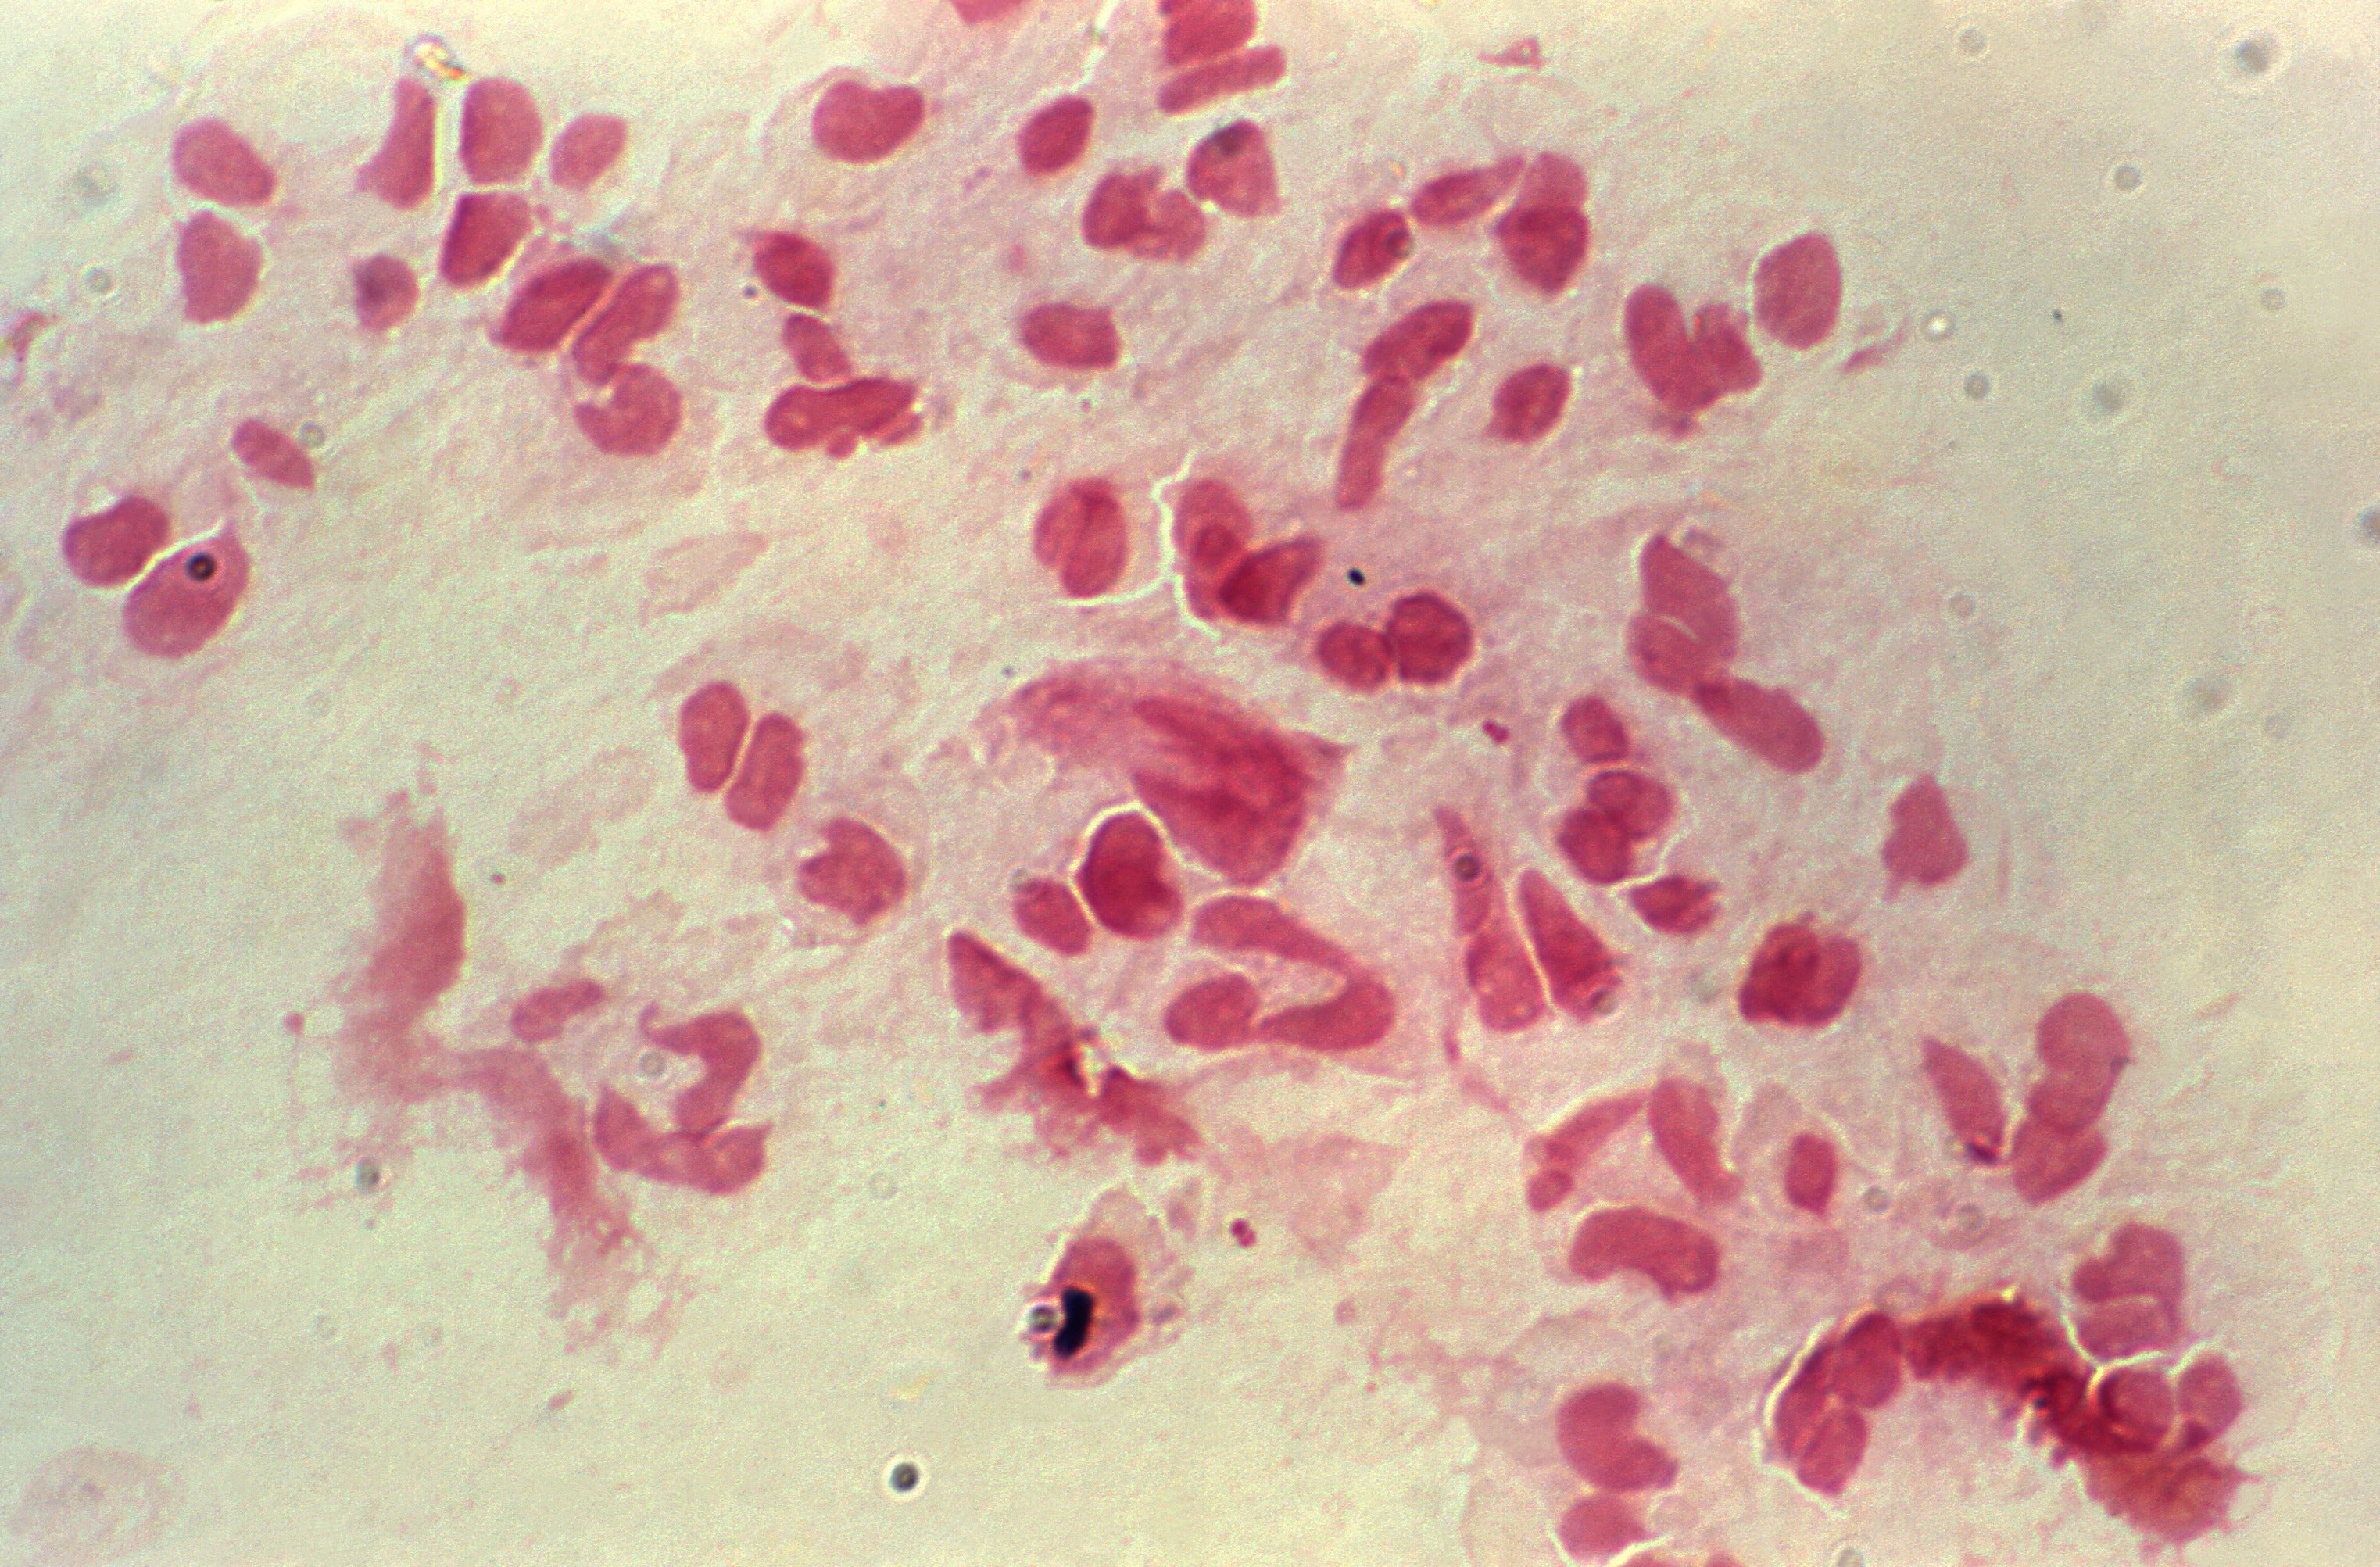 A sample of genital discharge seem under a microscope from someone with gonorrhea. (Image: CDC/Joe Miller)